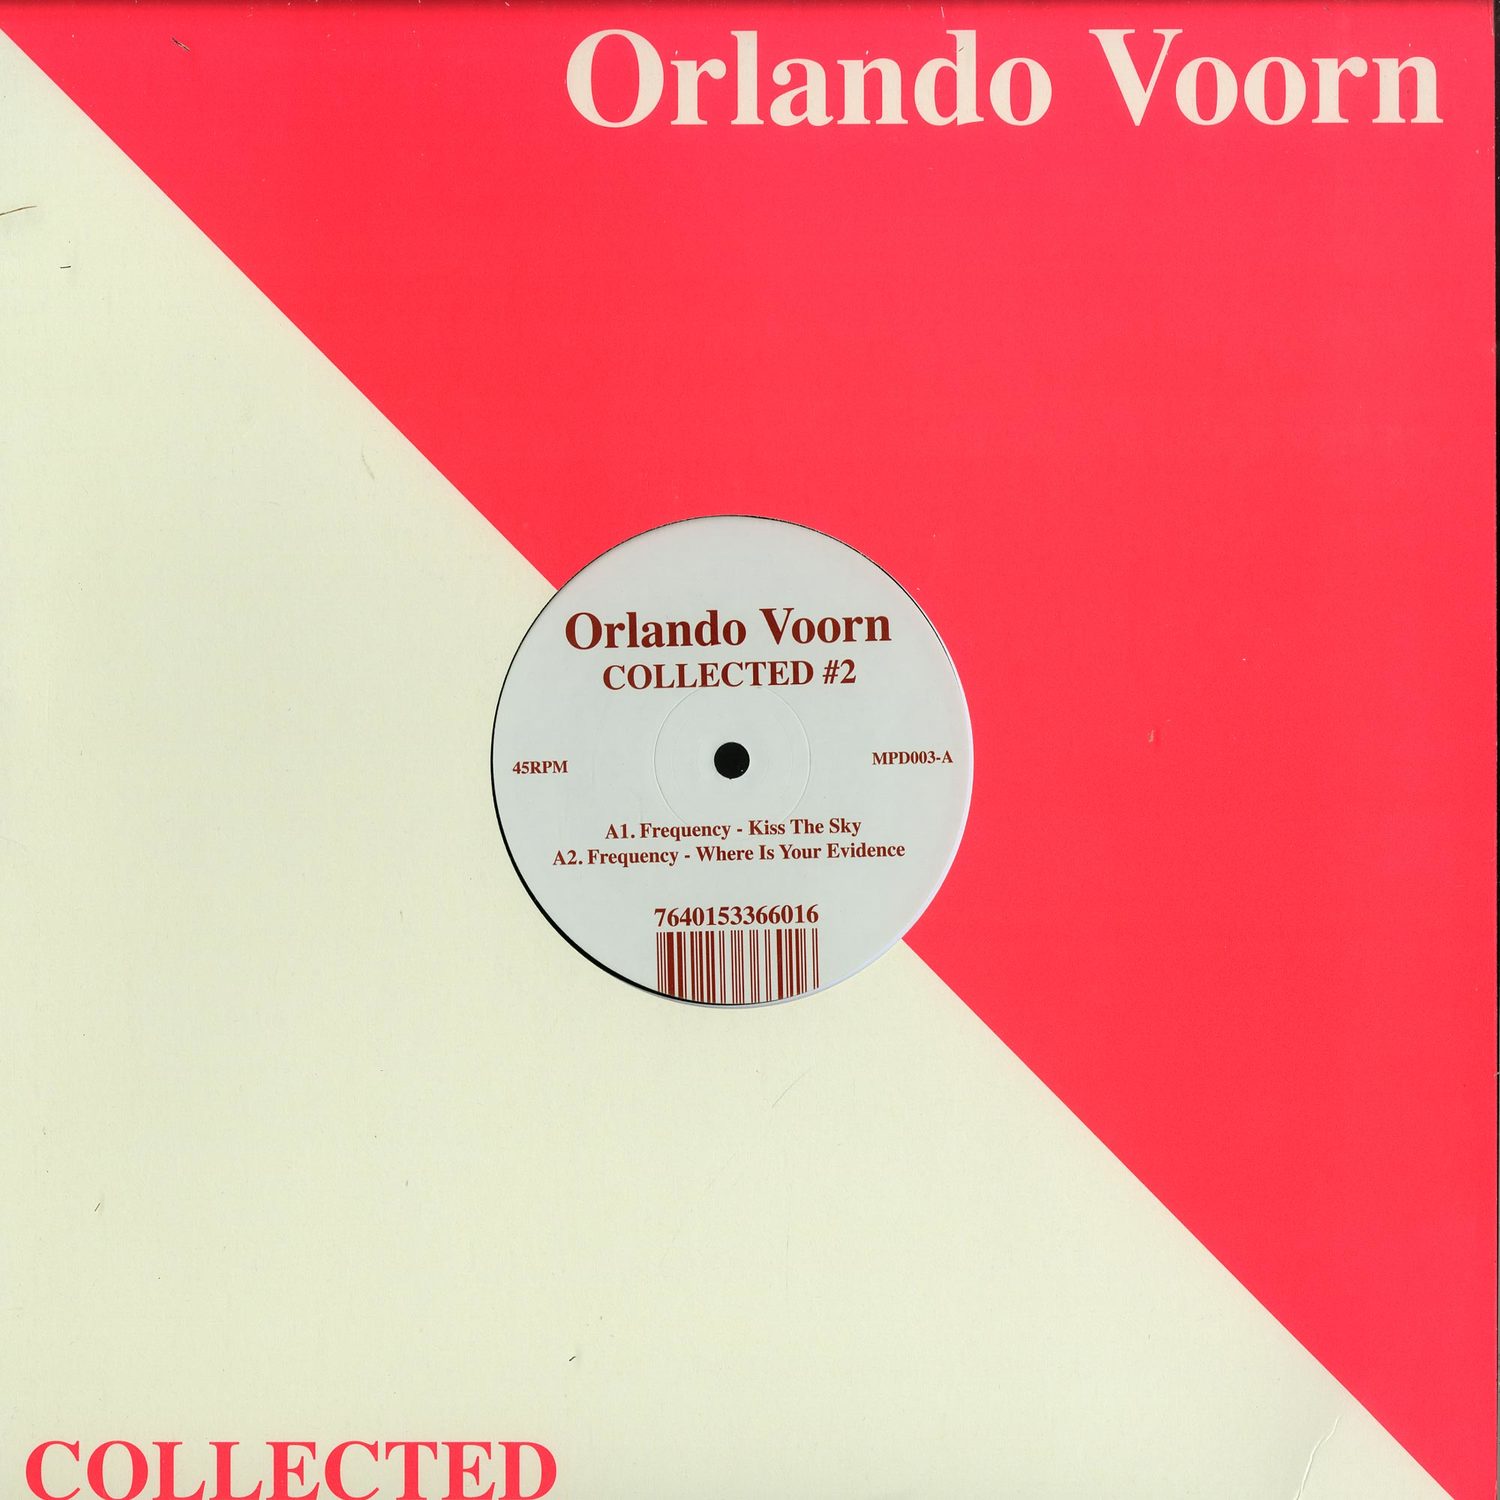 Orlando Voorn - COLLECTED EP 2